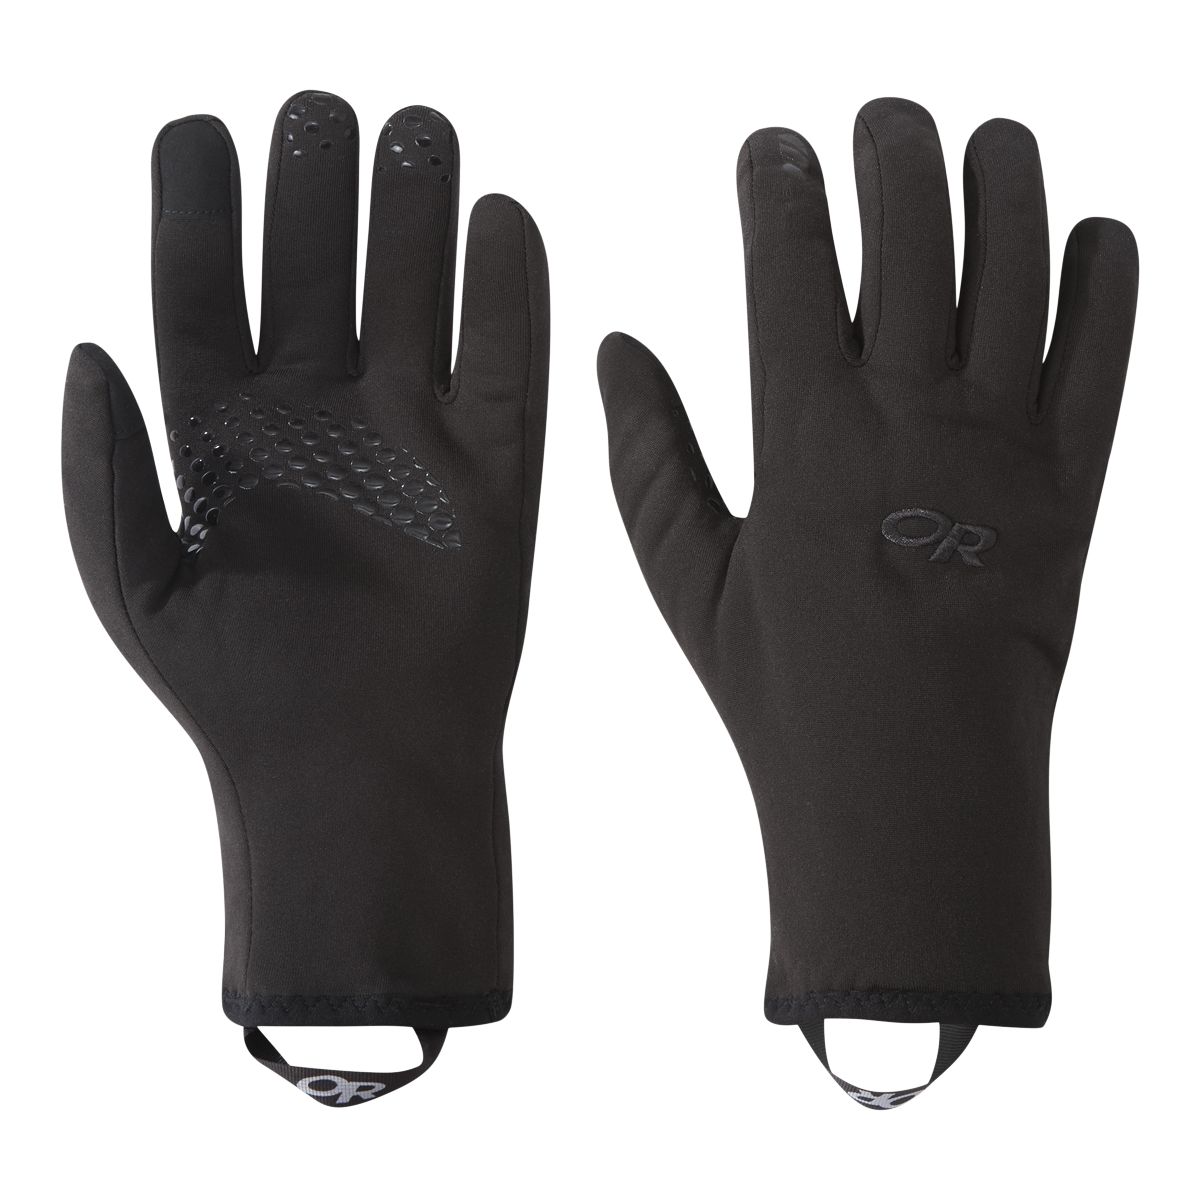 https://media-www.atmosphere.ca/product/div-03-softgoods/dpt-78-winter-clothing-accessories/sdpt-01-mens/333858194/outdoor-research-mens-waterproof-liners-0922-bl-26421fb0-45f1-42c7-9678-0424671e4f84-jpgrendition.jpg